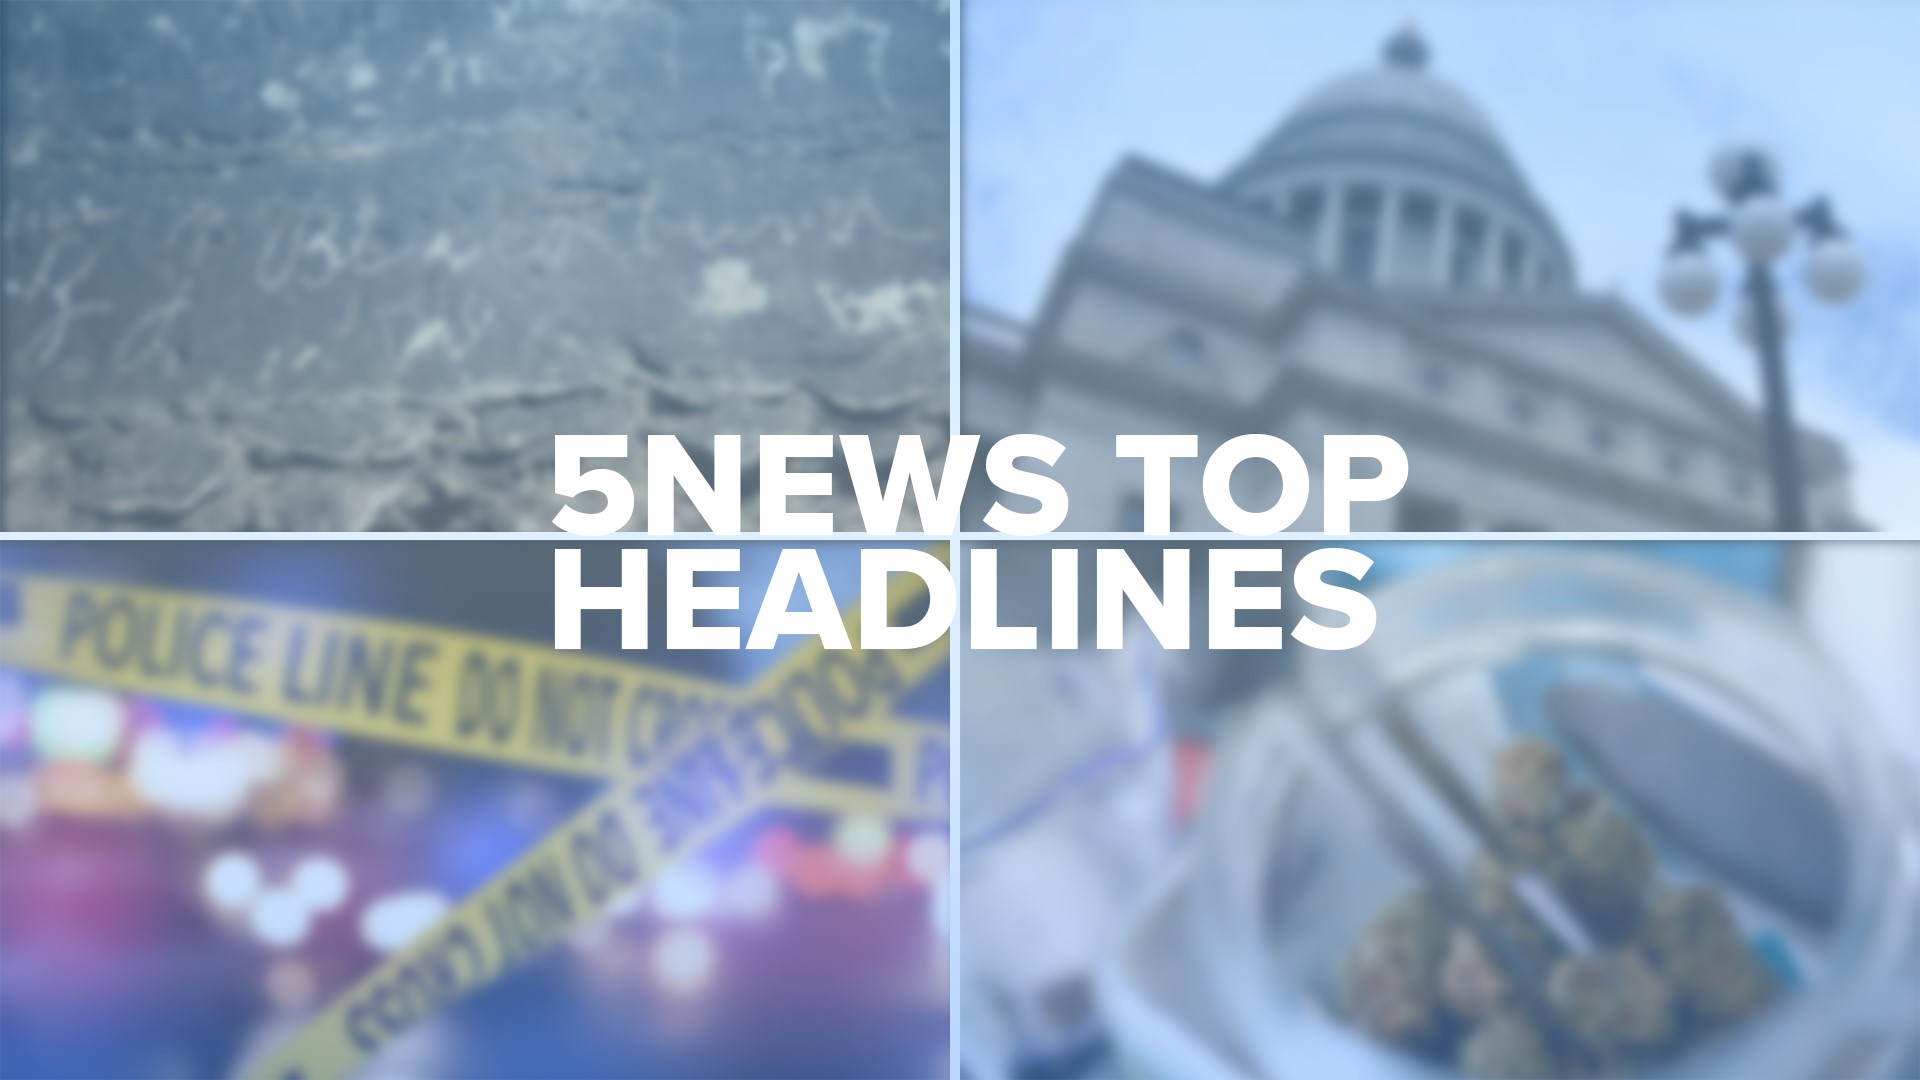 Take a look at today's top headlines for local news across the area! 📰